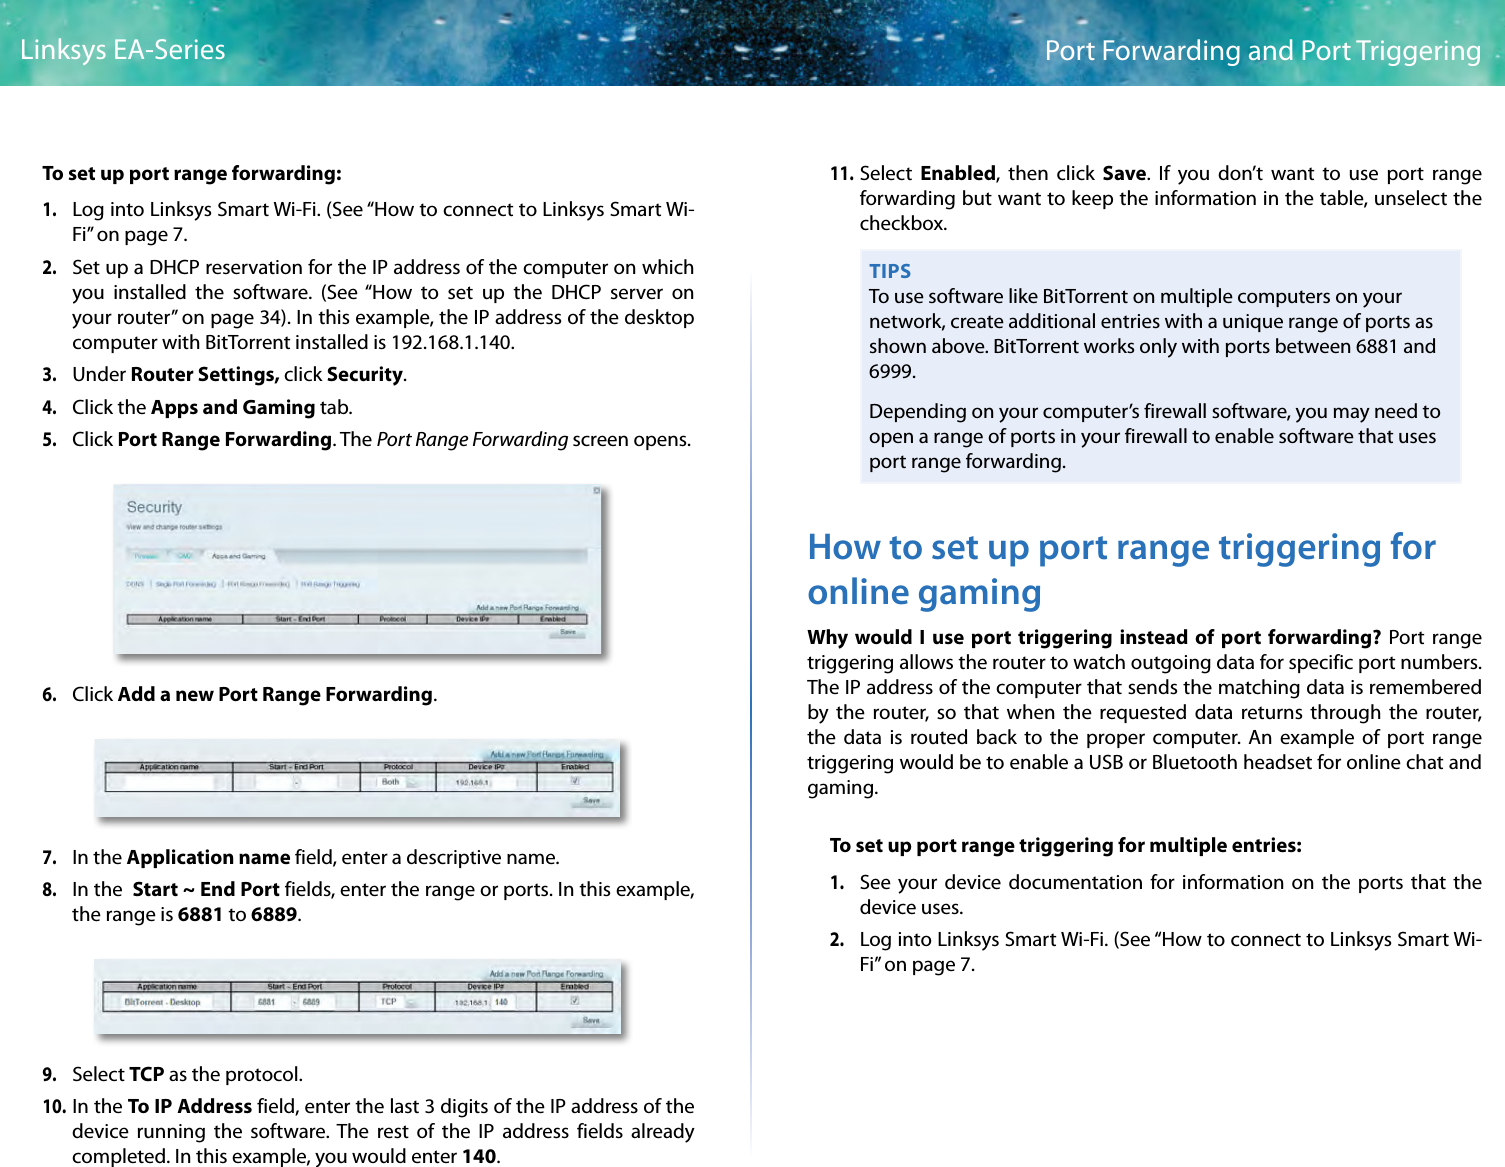 45Port Forwarding and Port TriggeringLinksys EA-SeriesTo set up port range forwarding:1. Log into Linksys Smart Wi-Fi. (See “How to connect to Linksys Smart Wi-Fi” on page 7.2. Set up a DHCP reservation for the IP address of the computer on which you installed the software. (See “How to set up the DHCP server on your router” on page 34). In this example, the IP address of the desktop computer with BitTorrent installed is 192.168.1.140. 3. Under Router Settings, click Security. 4. Click the Apps and Gaming tab.5. Click Port Range Forwarding. The Port Range Forwarding screen opens.6. Click Add a new Port Range Forwarding.7. In the Application name field, enter a descriptive name.8. In the  Start ~ End Port fields, enter the range or ports. In this example, the range is 6881 to 6889.9. Select TCP as the protocol. 10. In the To IP Address field, enter the last 3 digits of the IP address of the device running the software. The rest of the IP address fields already completed. In this example, you would enter 140. 11. Select  Enabled, then click Save. If you don’t want to use port range forwarding but want to keep the information in the table, unselect the checkbox.TIPSTo use software like BitTorrent on multiple computers on your network, create additional entries with a unique range of ports as shown above. BitTorrent works only with ports between 6881 and 6999.Depending on your computer’s firewall software, you may need to open a range of ports in your firewall to enable software that uses port range forwarding.How to set up port range triggering for online gamingWhy would I use port triggering instead of port forwarding? Port range triggering allows the router to watch outgoing data for specific port numbers. The IP address of the computer that sends the matching data is remembered by the router, so that when the requested data returns through the router, the data is routed back to the proper computer. An example of port range triggering would be to enable a USB or Bluetooth headset for online chat and gaming.To set up port range triggering for multiple entries: 1. See your device documentation for information on the ports that the device uses.2. Log into Linksys Smart Wi-Fi. (See “How to connect to Linksys Smart Wi-Fi” on page 7.